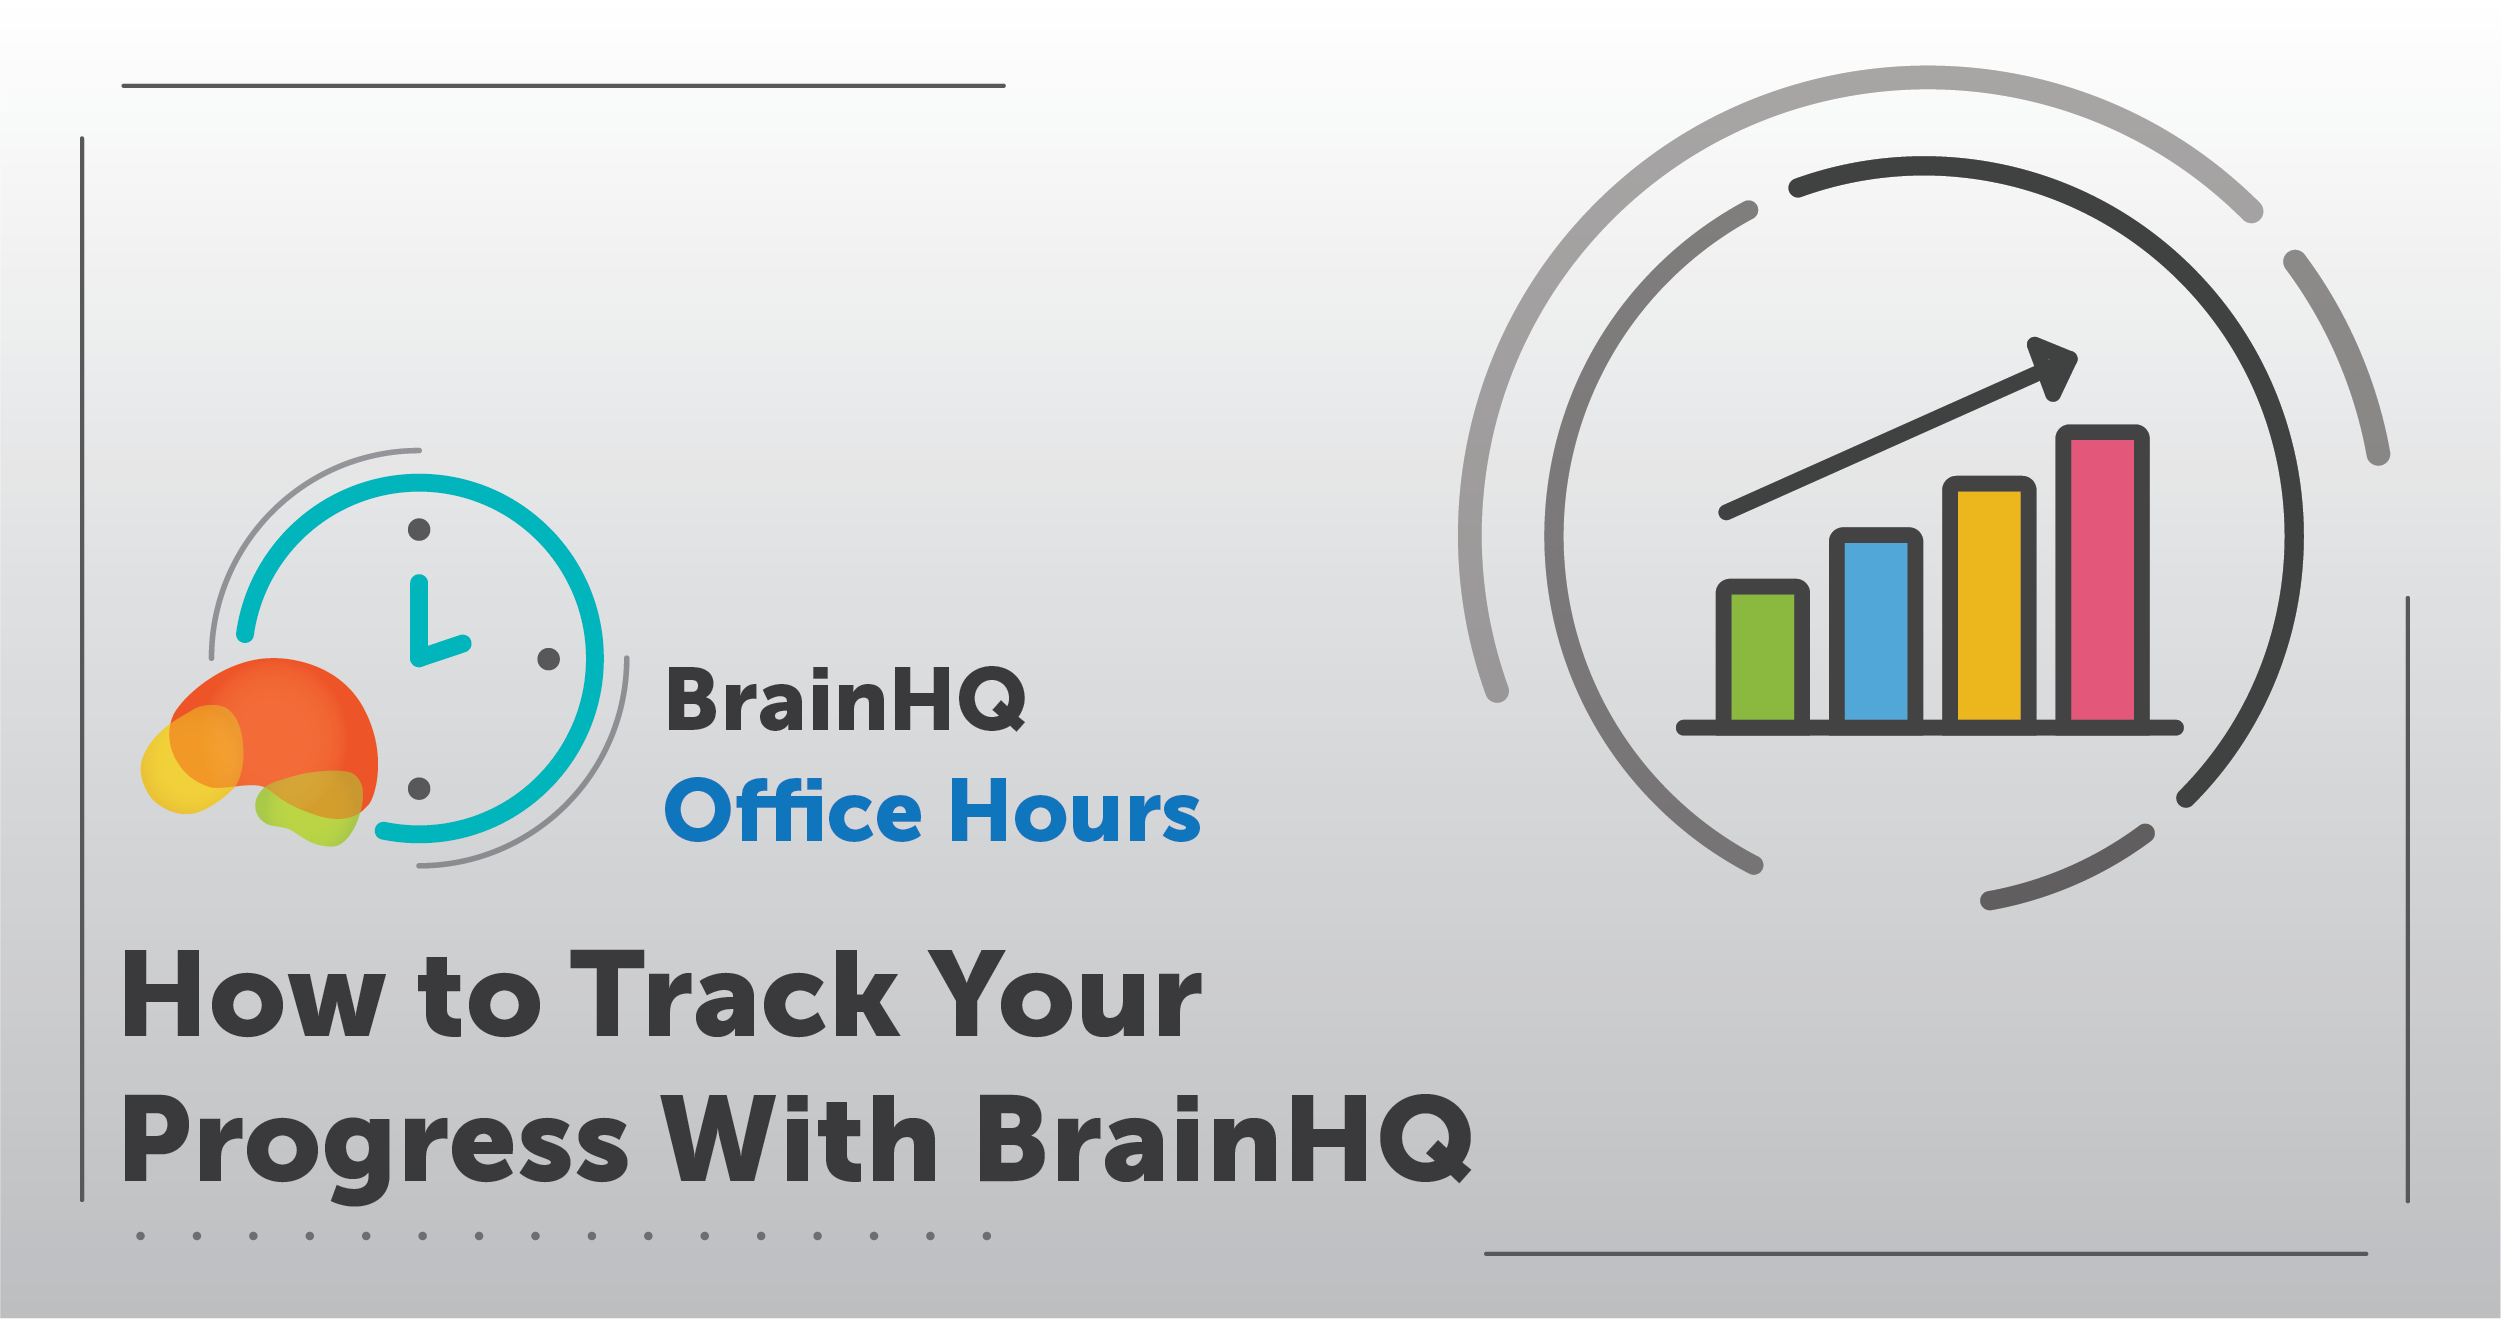 BrainHQ Office Hours: How to Track Your Progress With BrainHQ